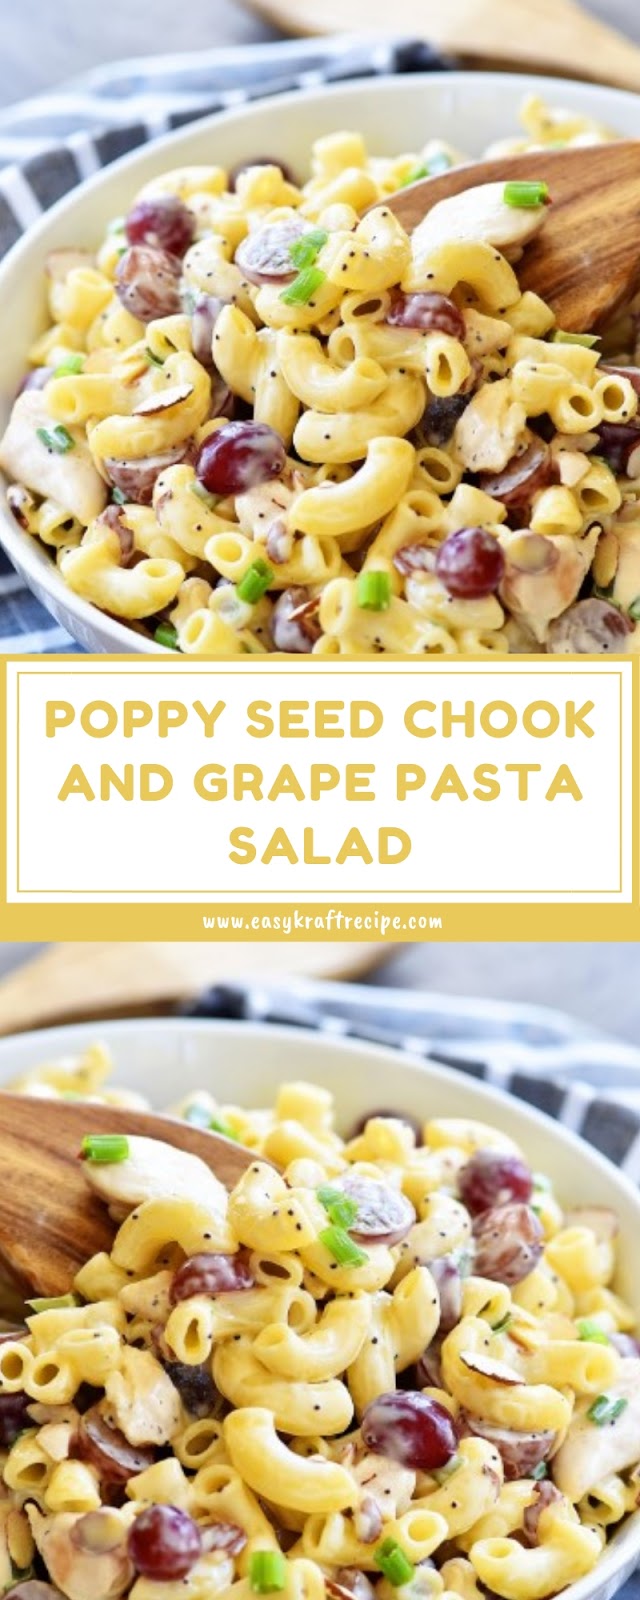 POPPY SEED CHOOK AND GRAPE PASTA SALAD